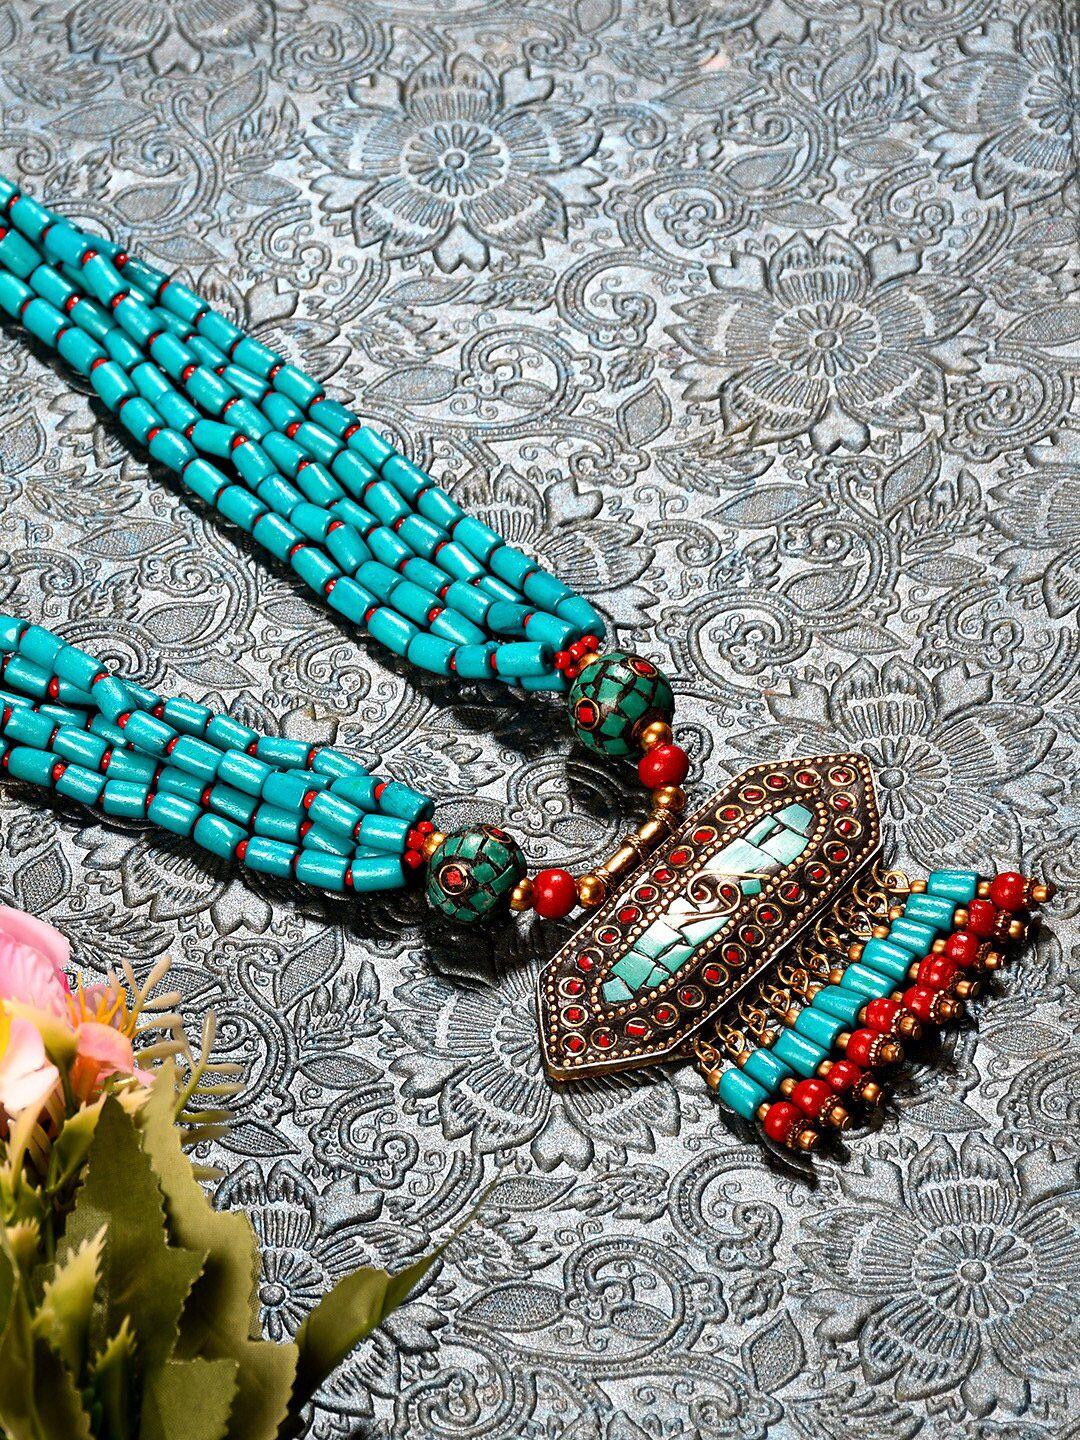 bamboo tree jewels turquoise blue & red afghan necklace